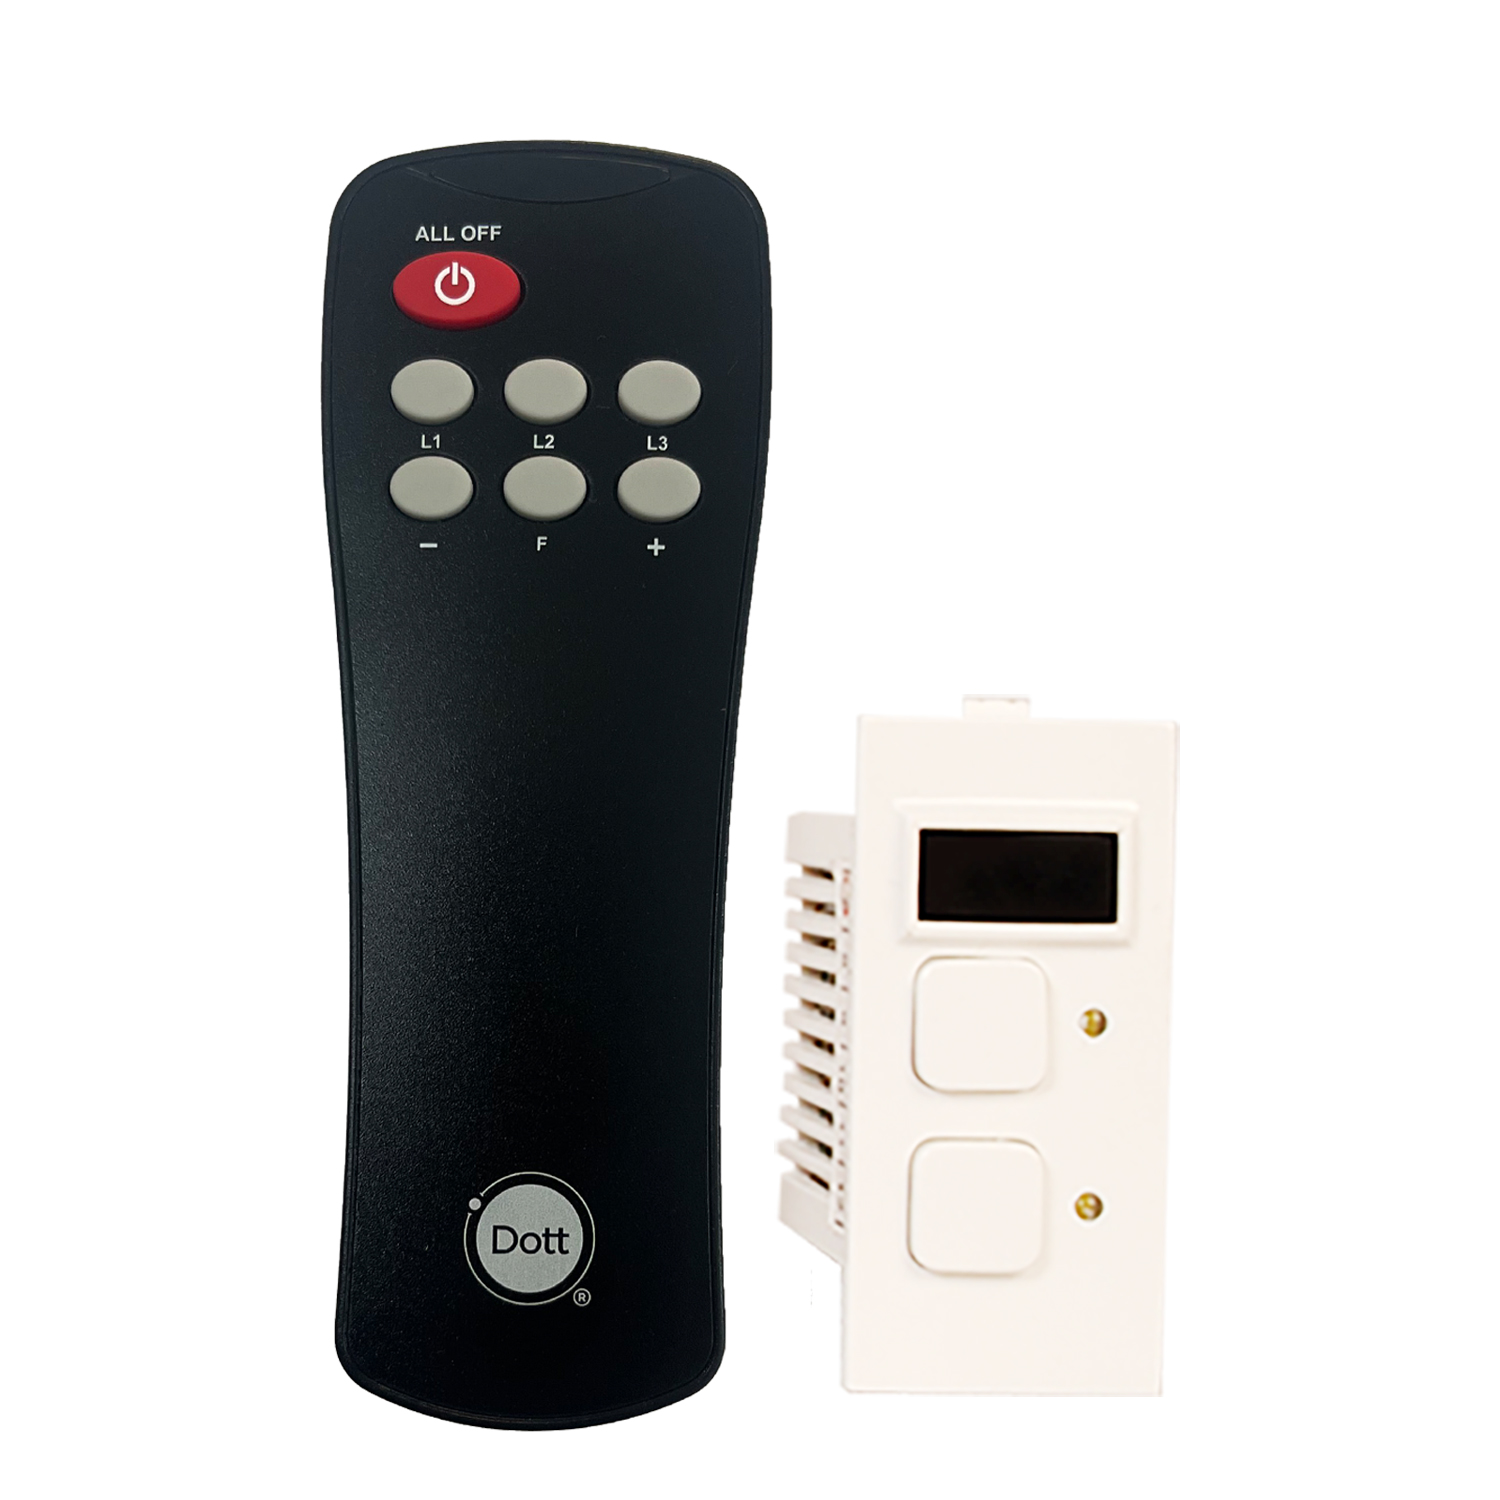 CURO M- Modular Remote Switch For 1 Light & 1 Fan.